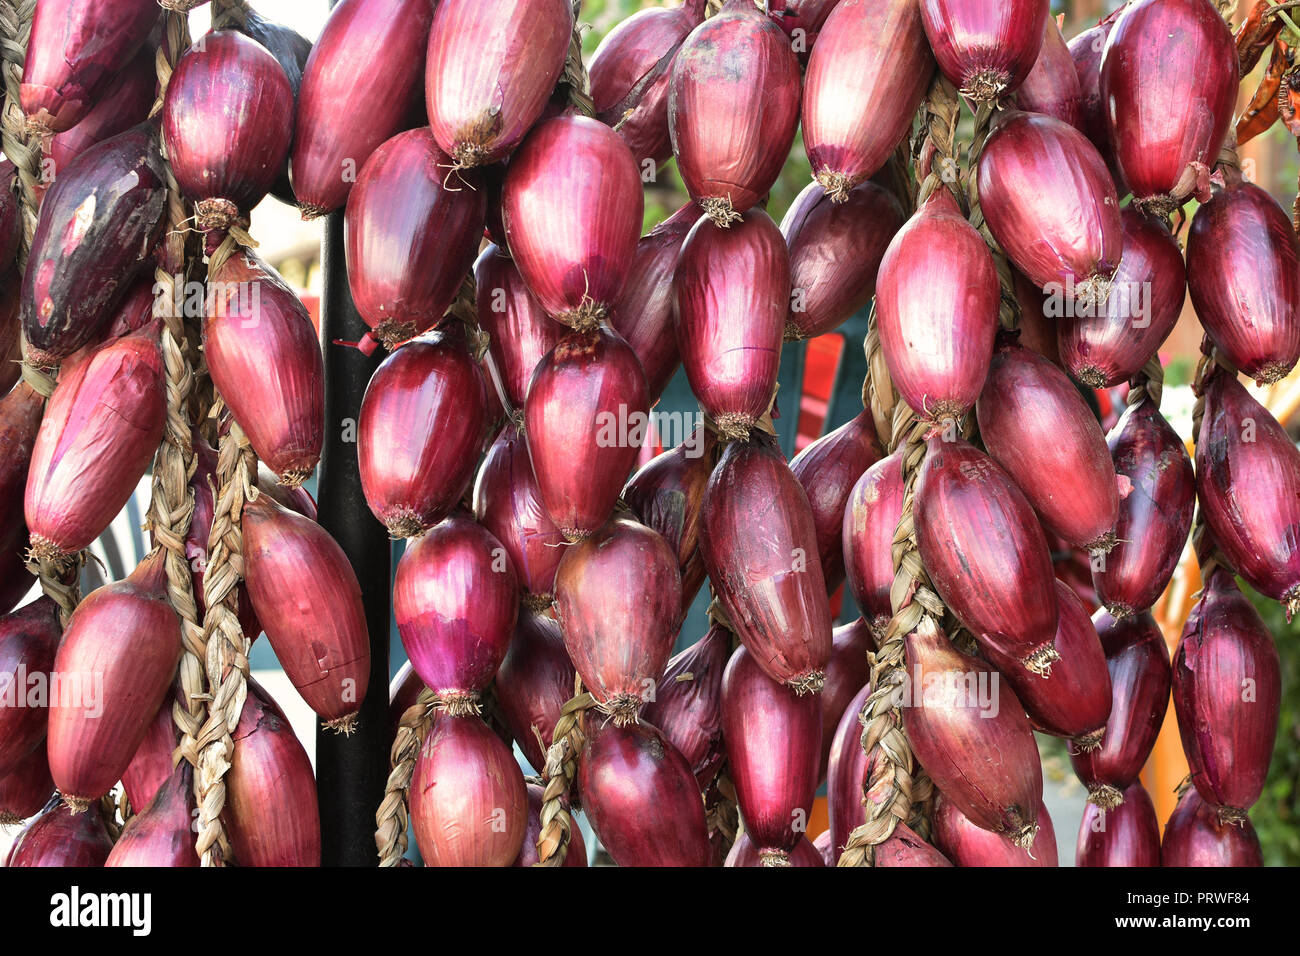 Close-up selective focus view of hanging braids of shiny red onions (Allium cepa). Rustic background. Organic agriculture Stock Photo